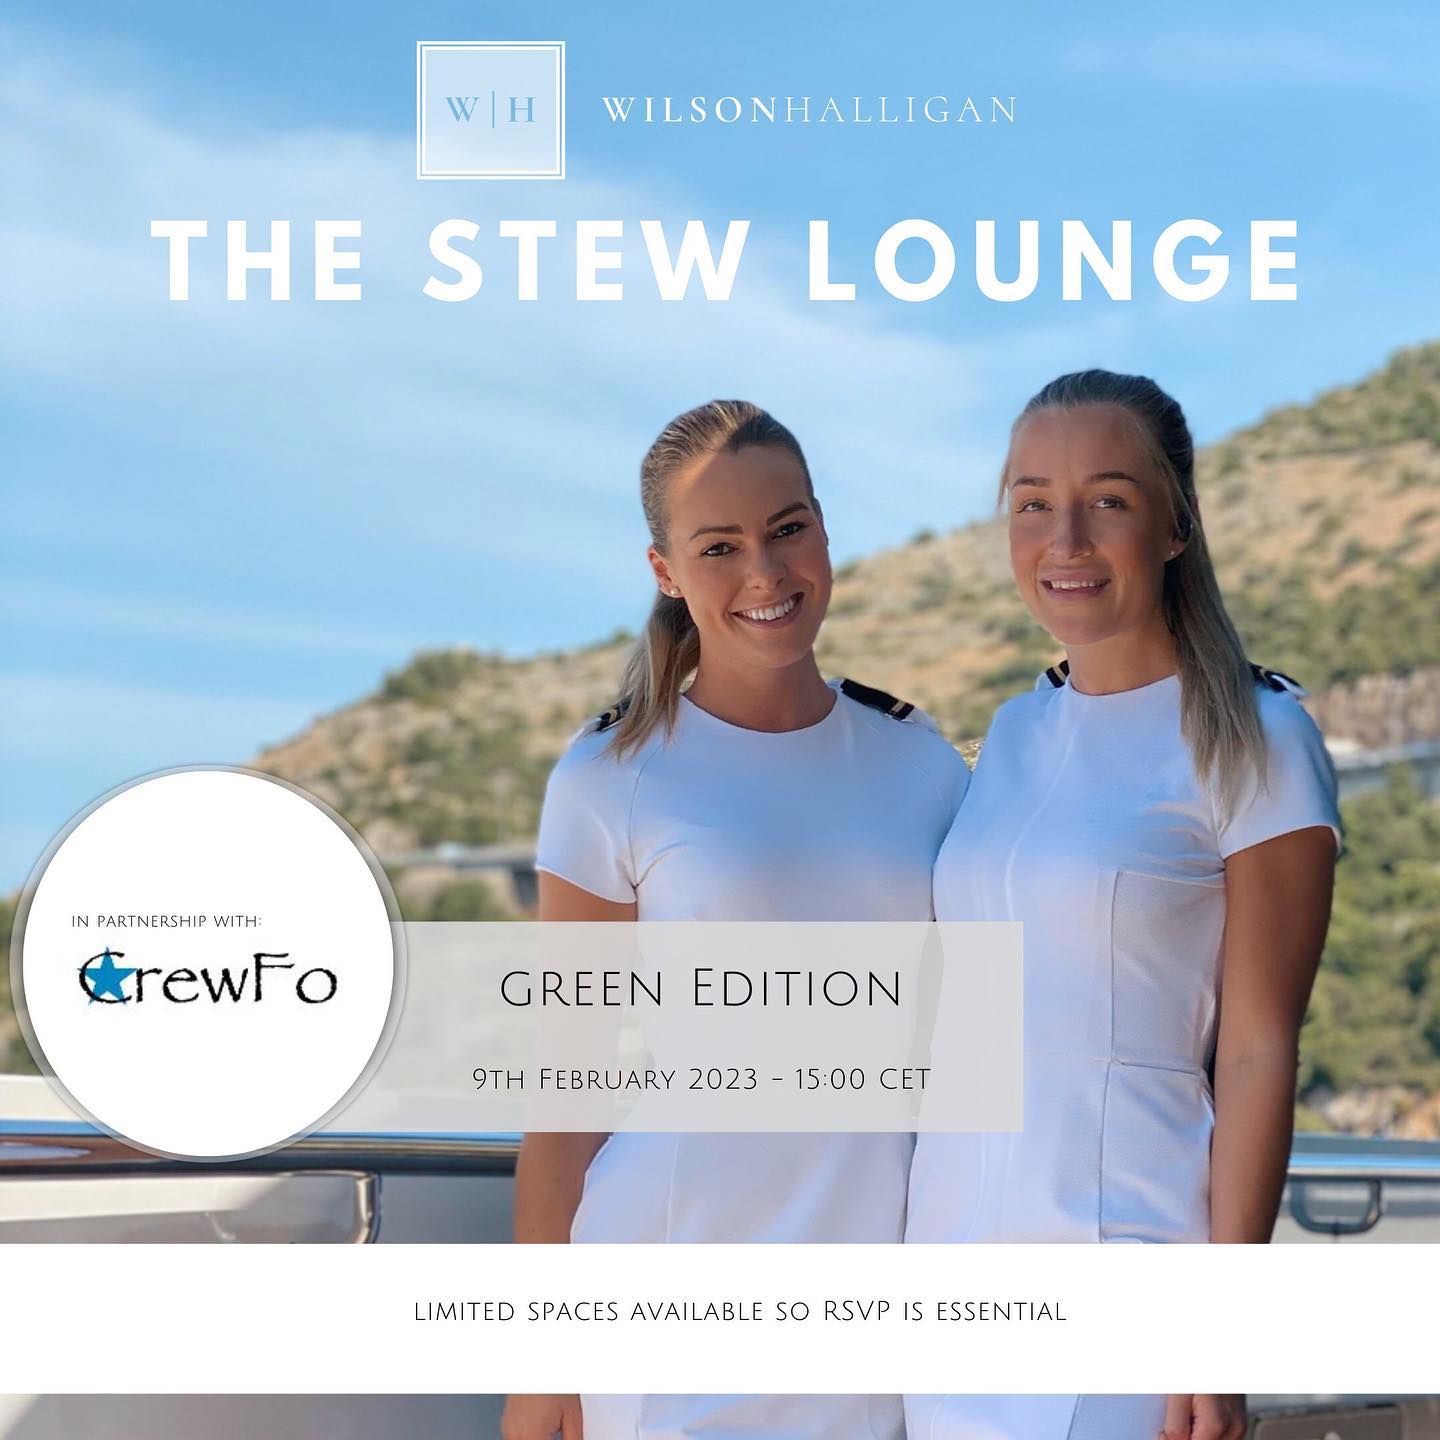 The stew lounge by Wilson Halligan and CrewFO aims to help Green Crew learn about some ins and outs of the industry